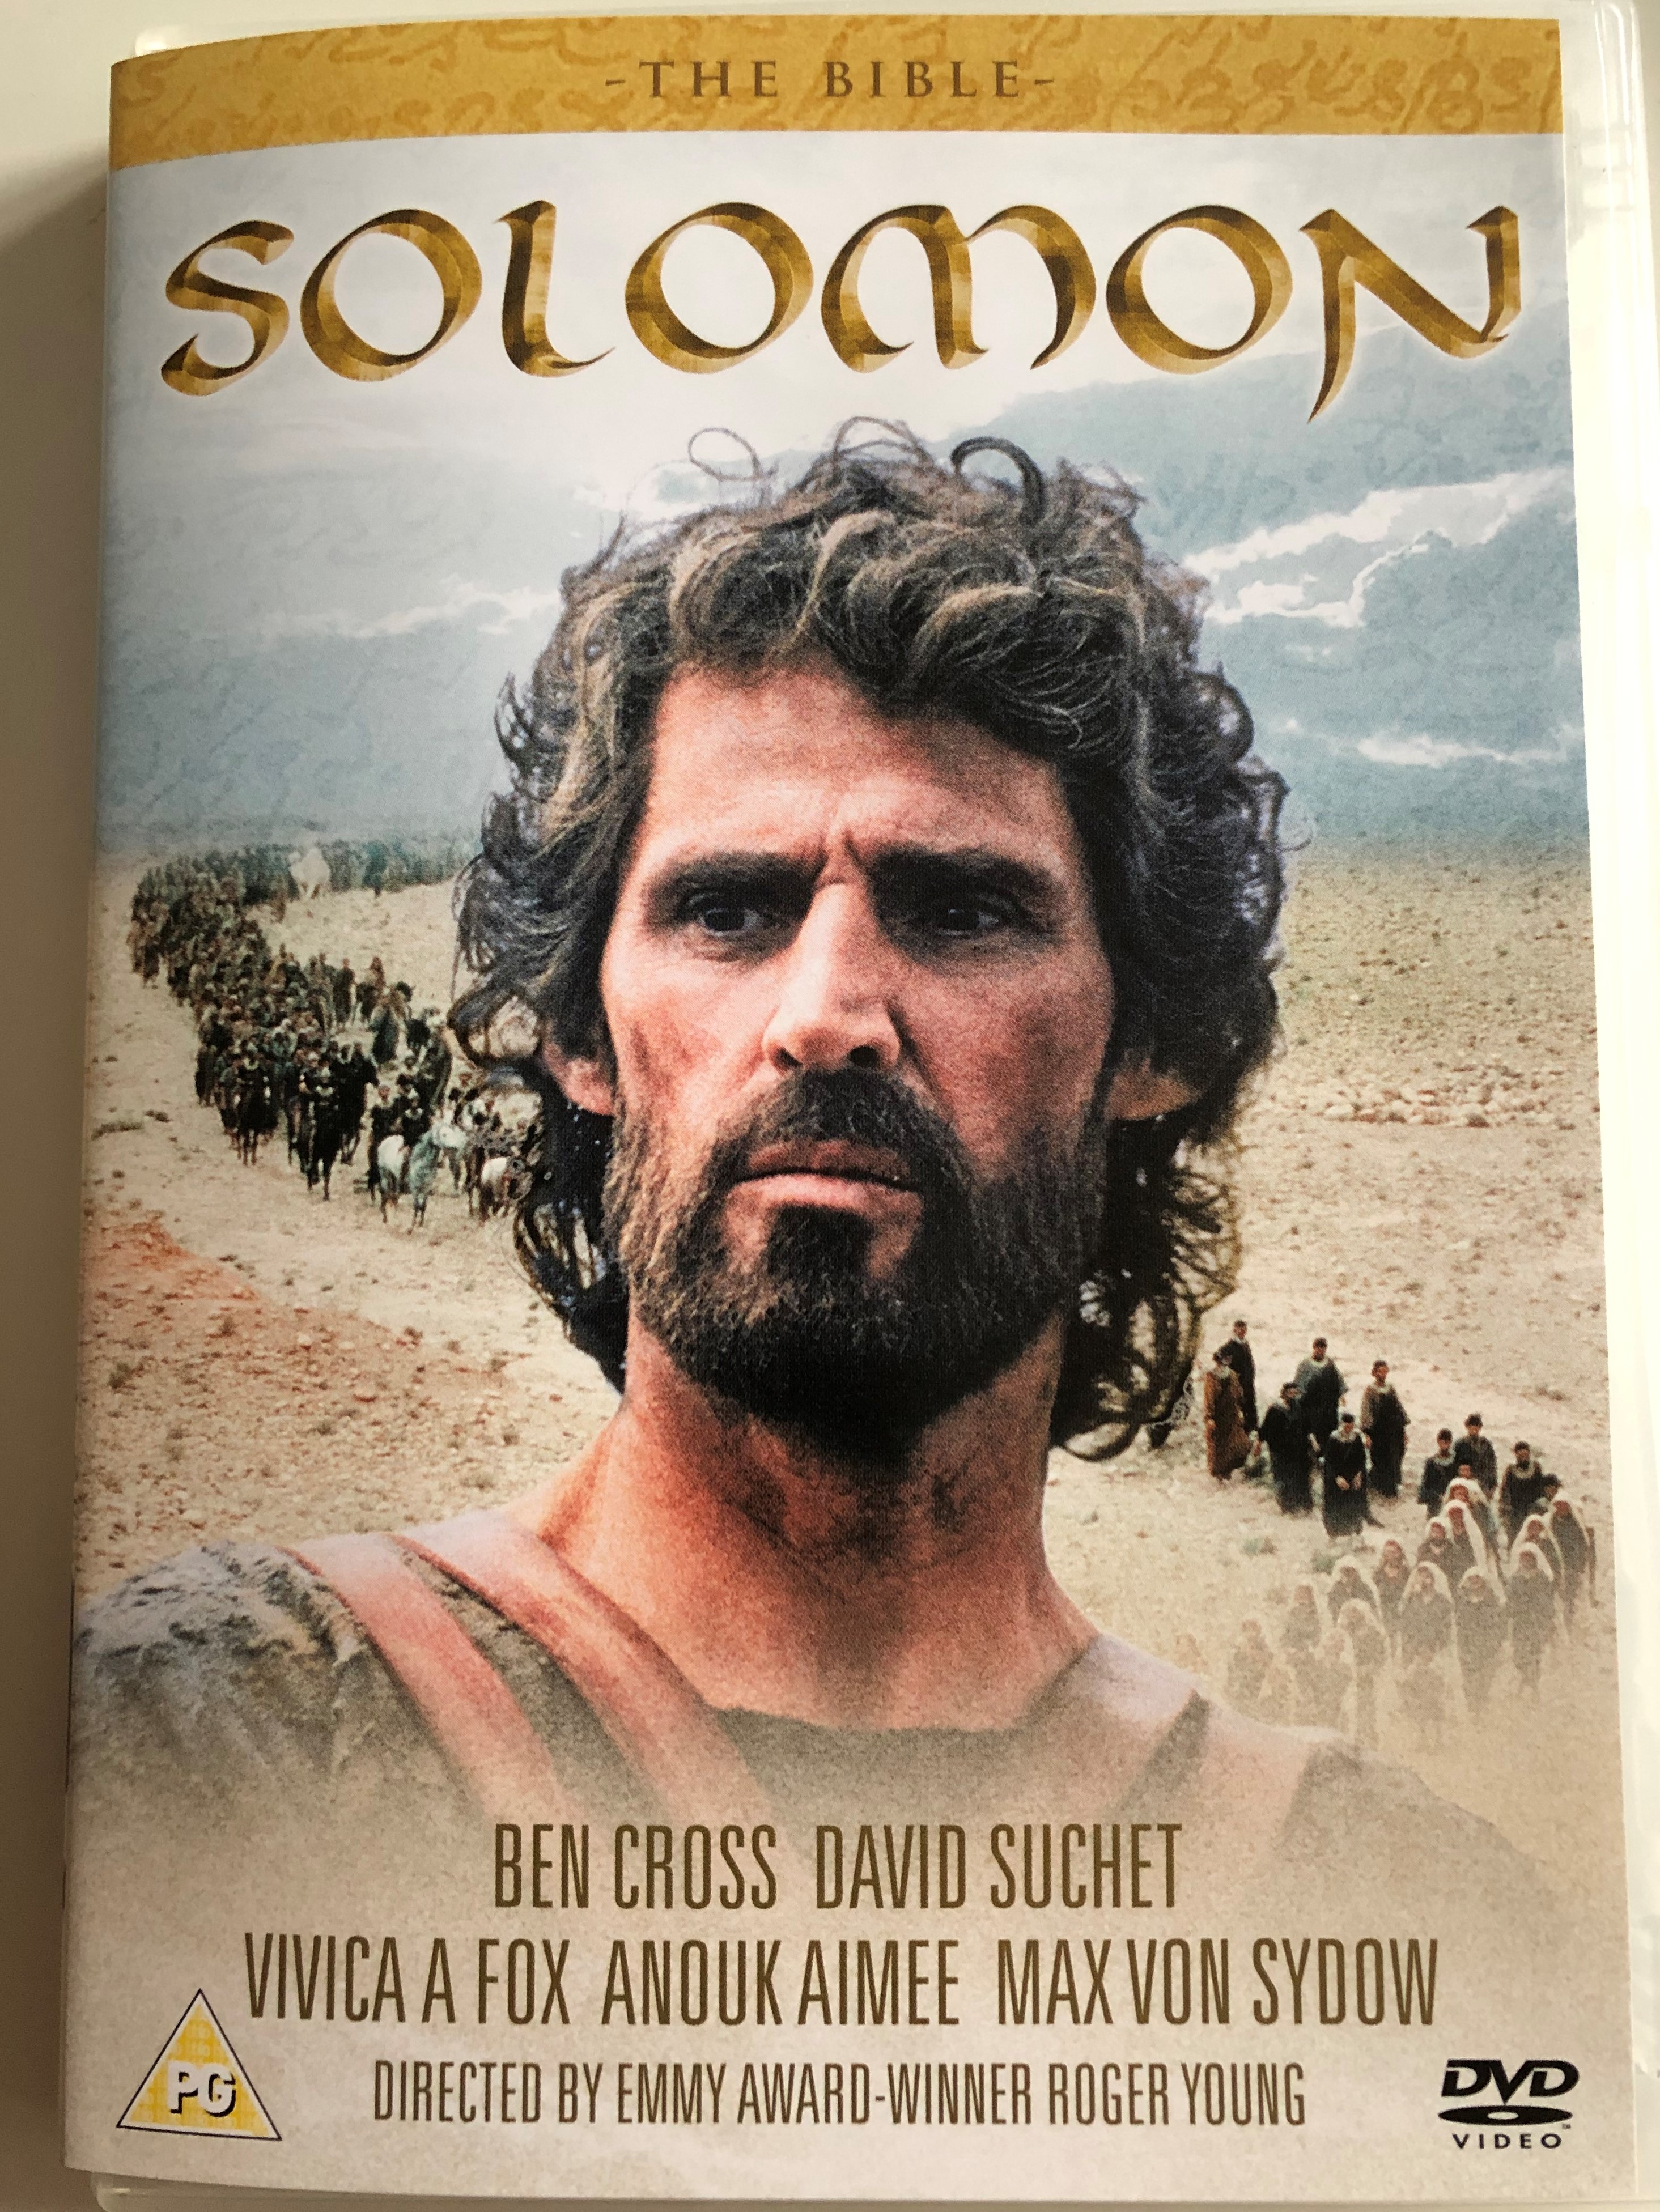 the-bible-solomon-dvd-directed-by-roger-young-1.jpg